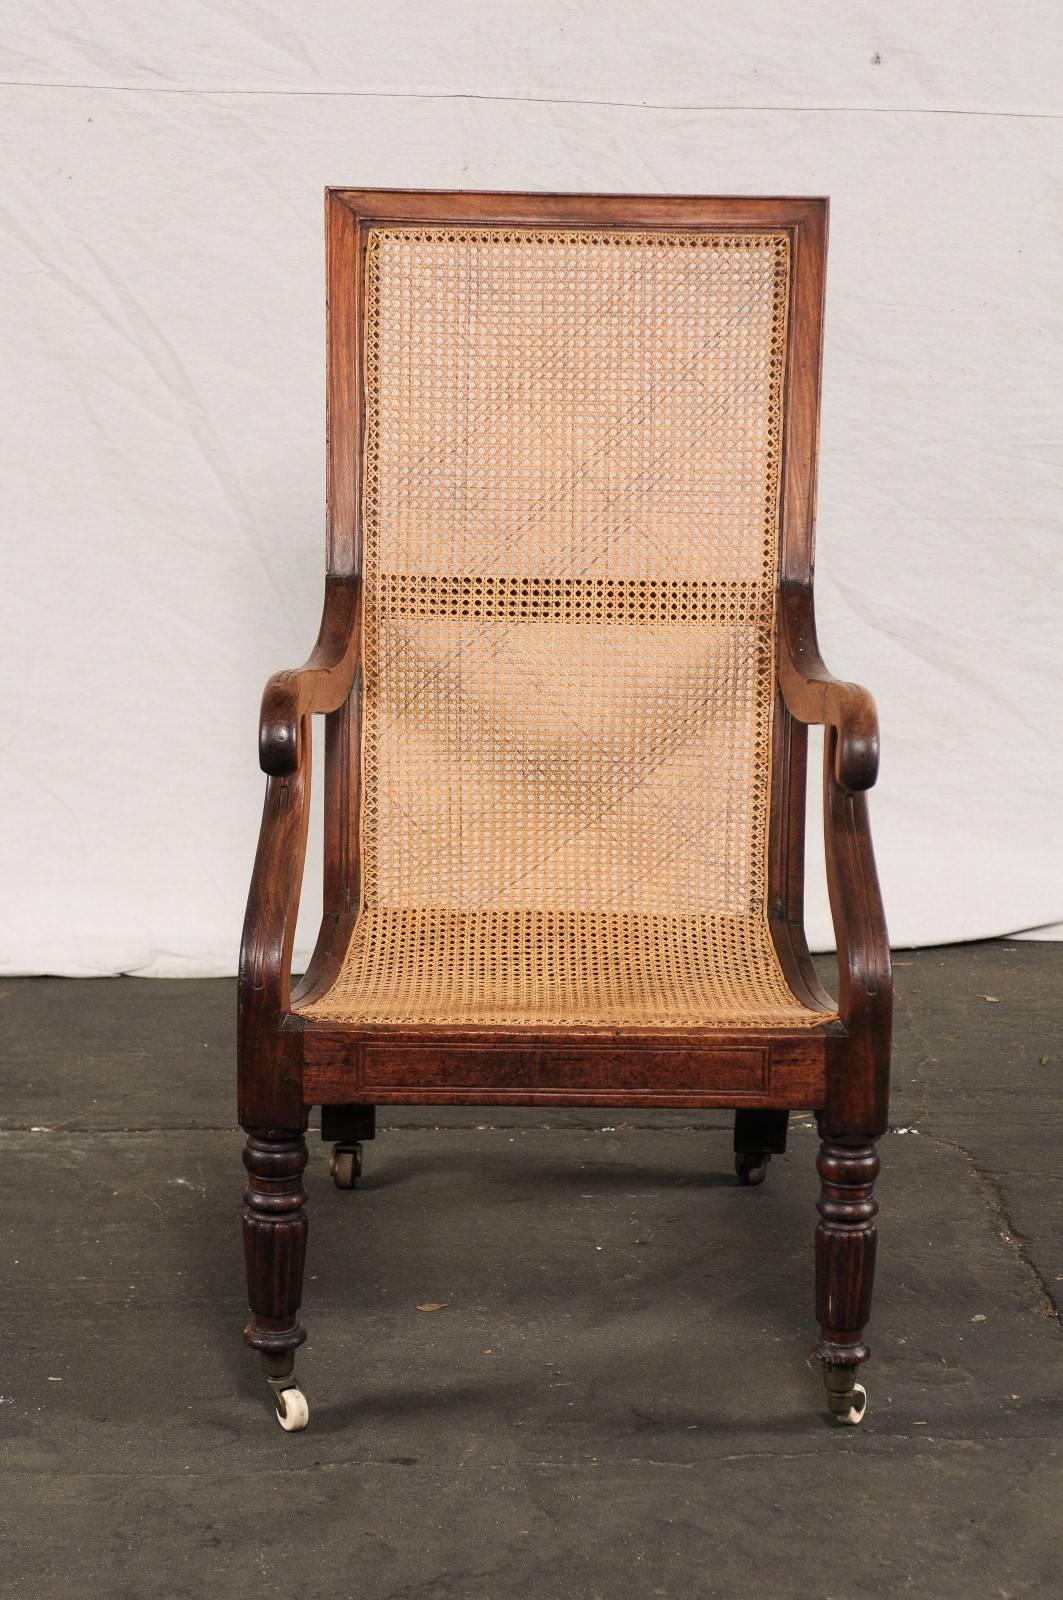 Early 19th Century Caribbean Regency Cane Chair, Hardware by Larrivee, circa 1820